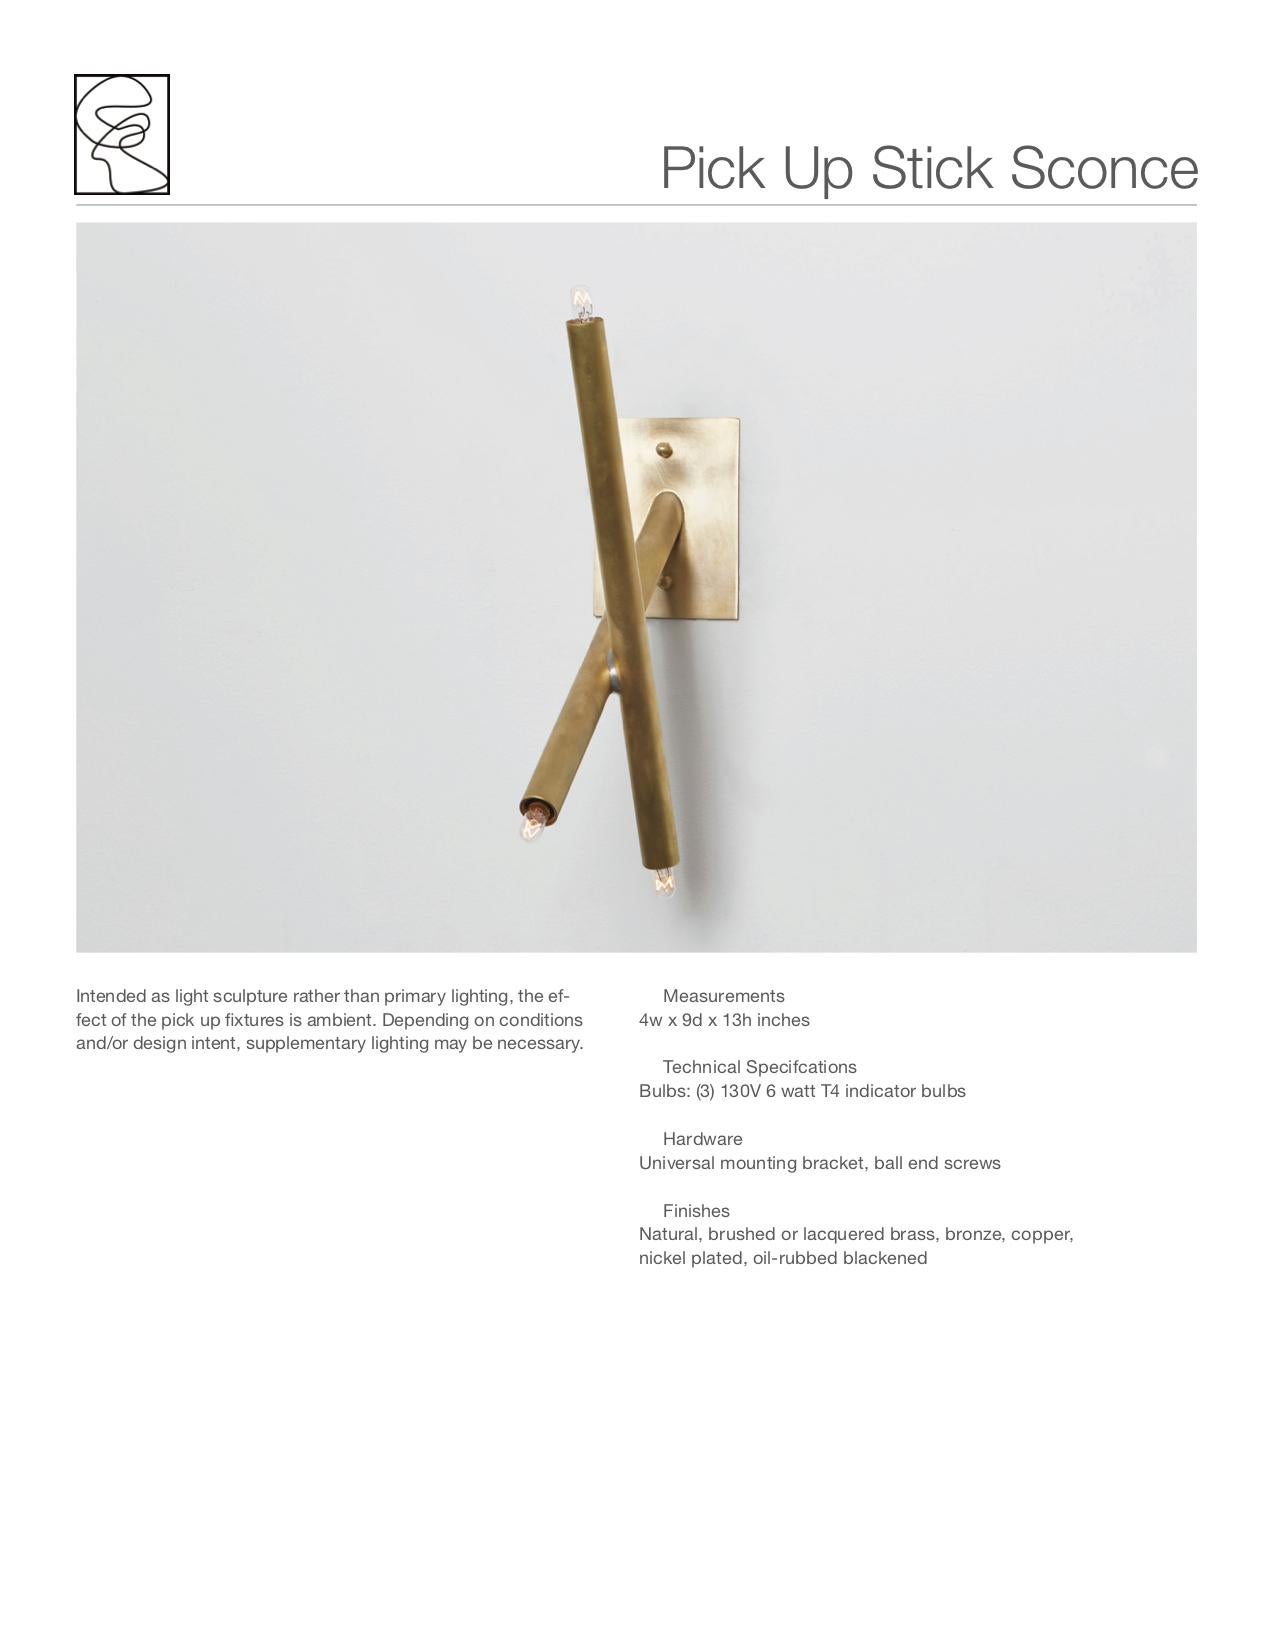 American Pick Up Stick Wall Sconce in Brass by Cam Crockford For Sale